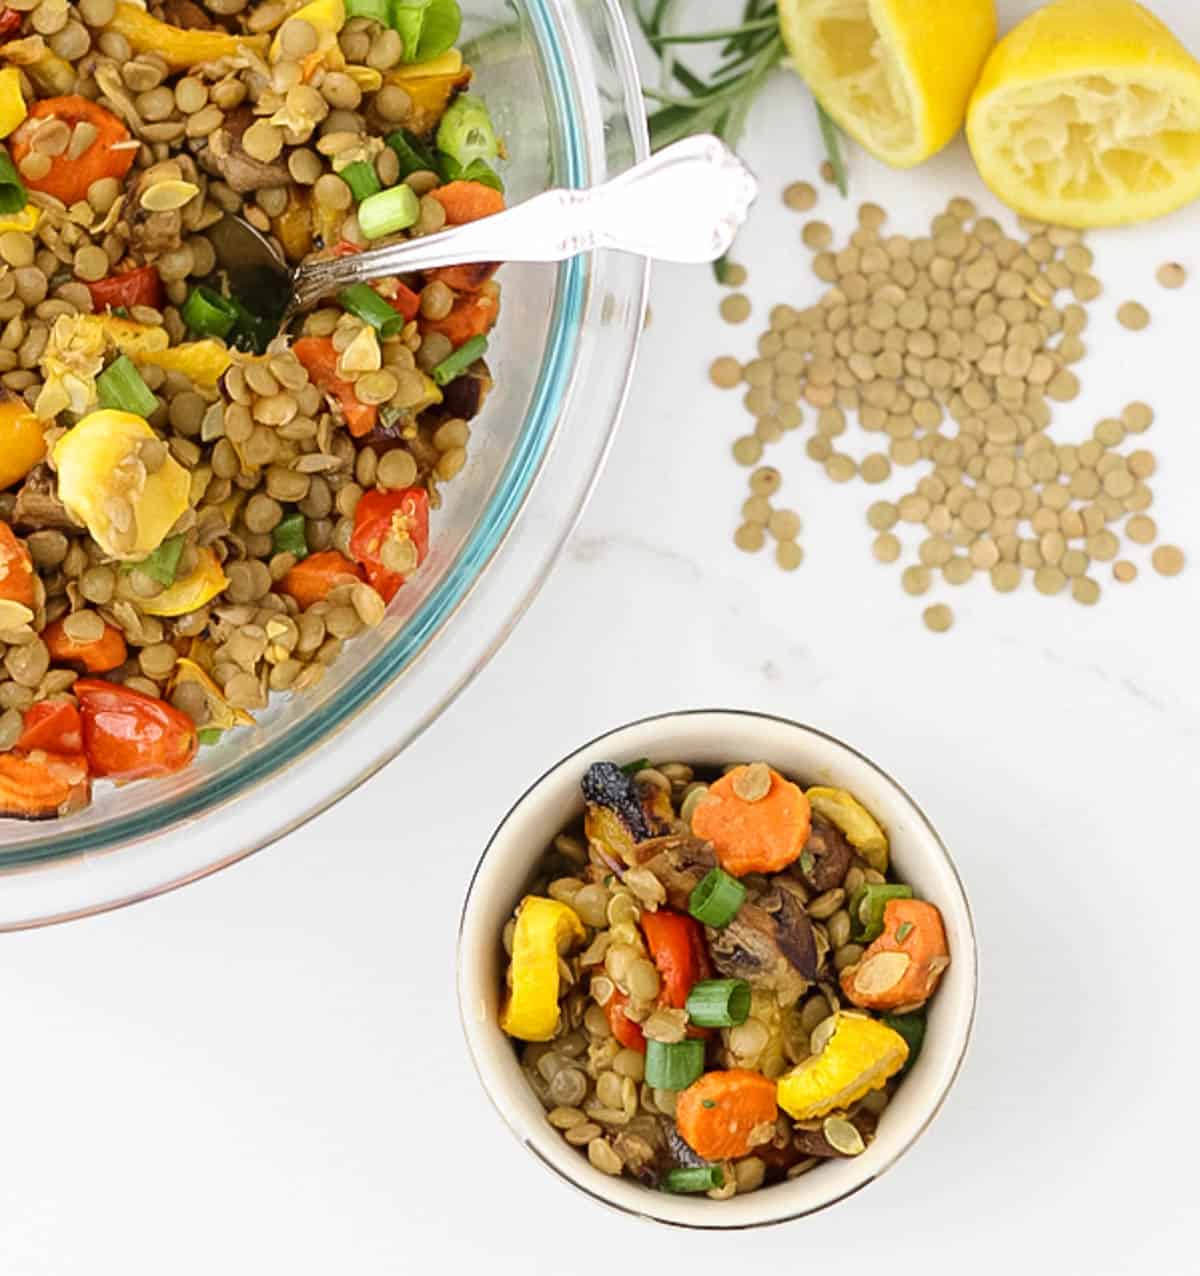 small bowl and large bowl of lentil salad with roasted veggies next to scattered green lentils, lemon, and fresh rosemary.